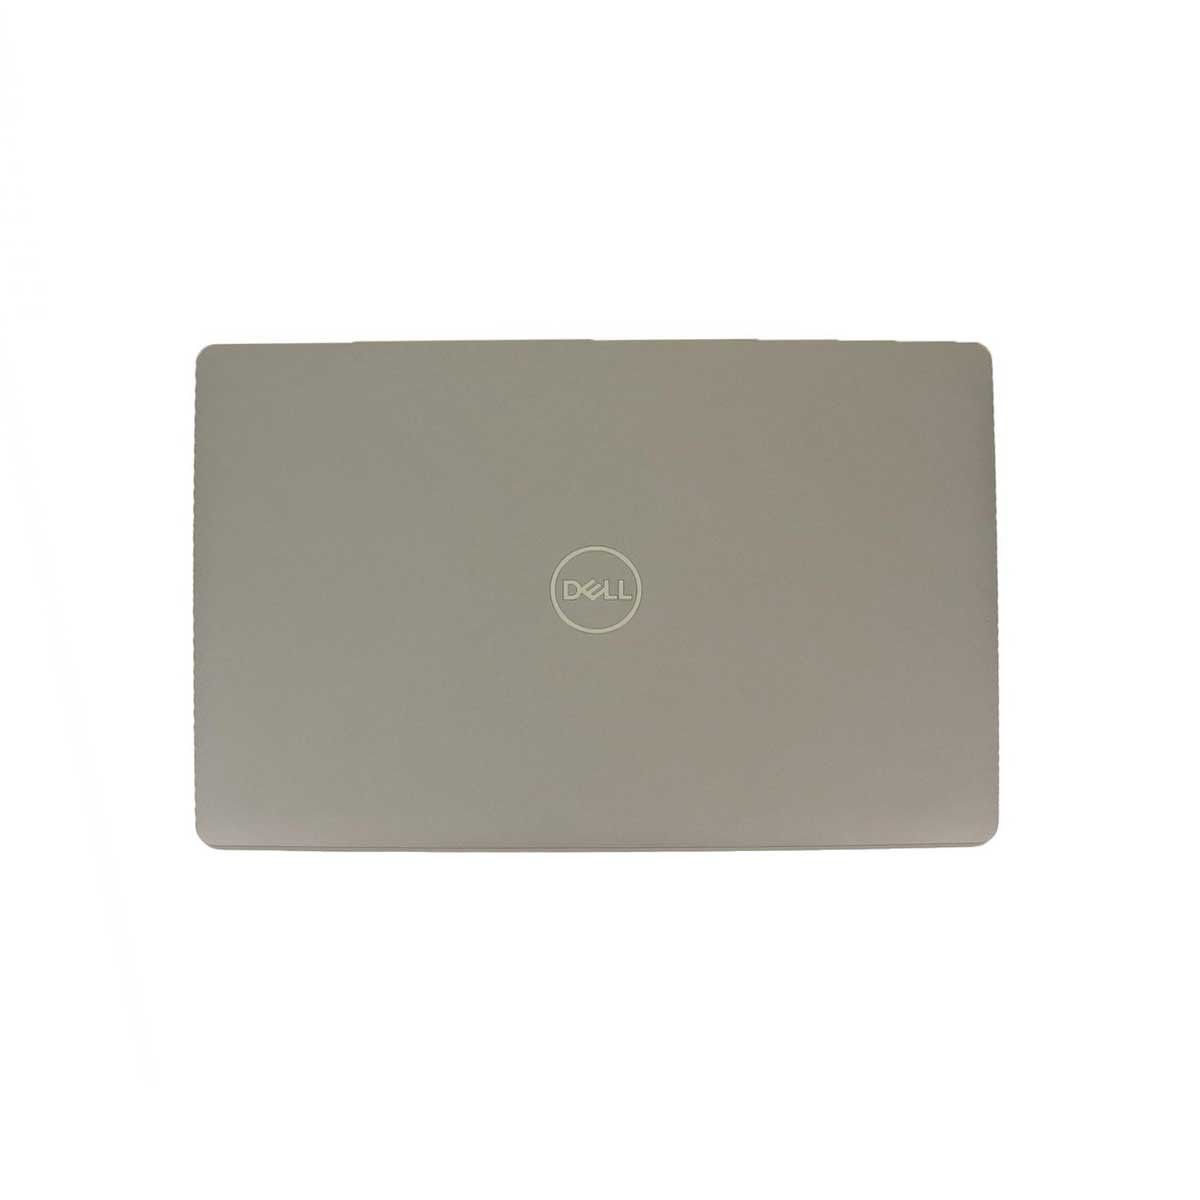 Dell Latitude 5510 Precision 3551 OEM LCD Back Cover Top Lid With Front Trim Bezel P/N F0N34, DHWP4, 77N90